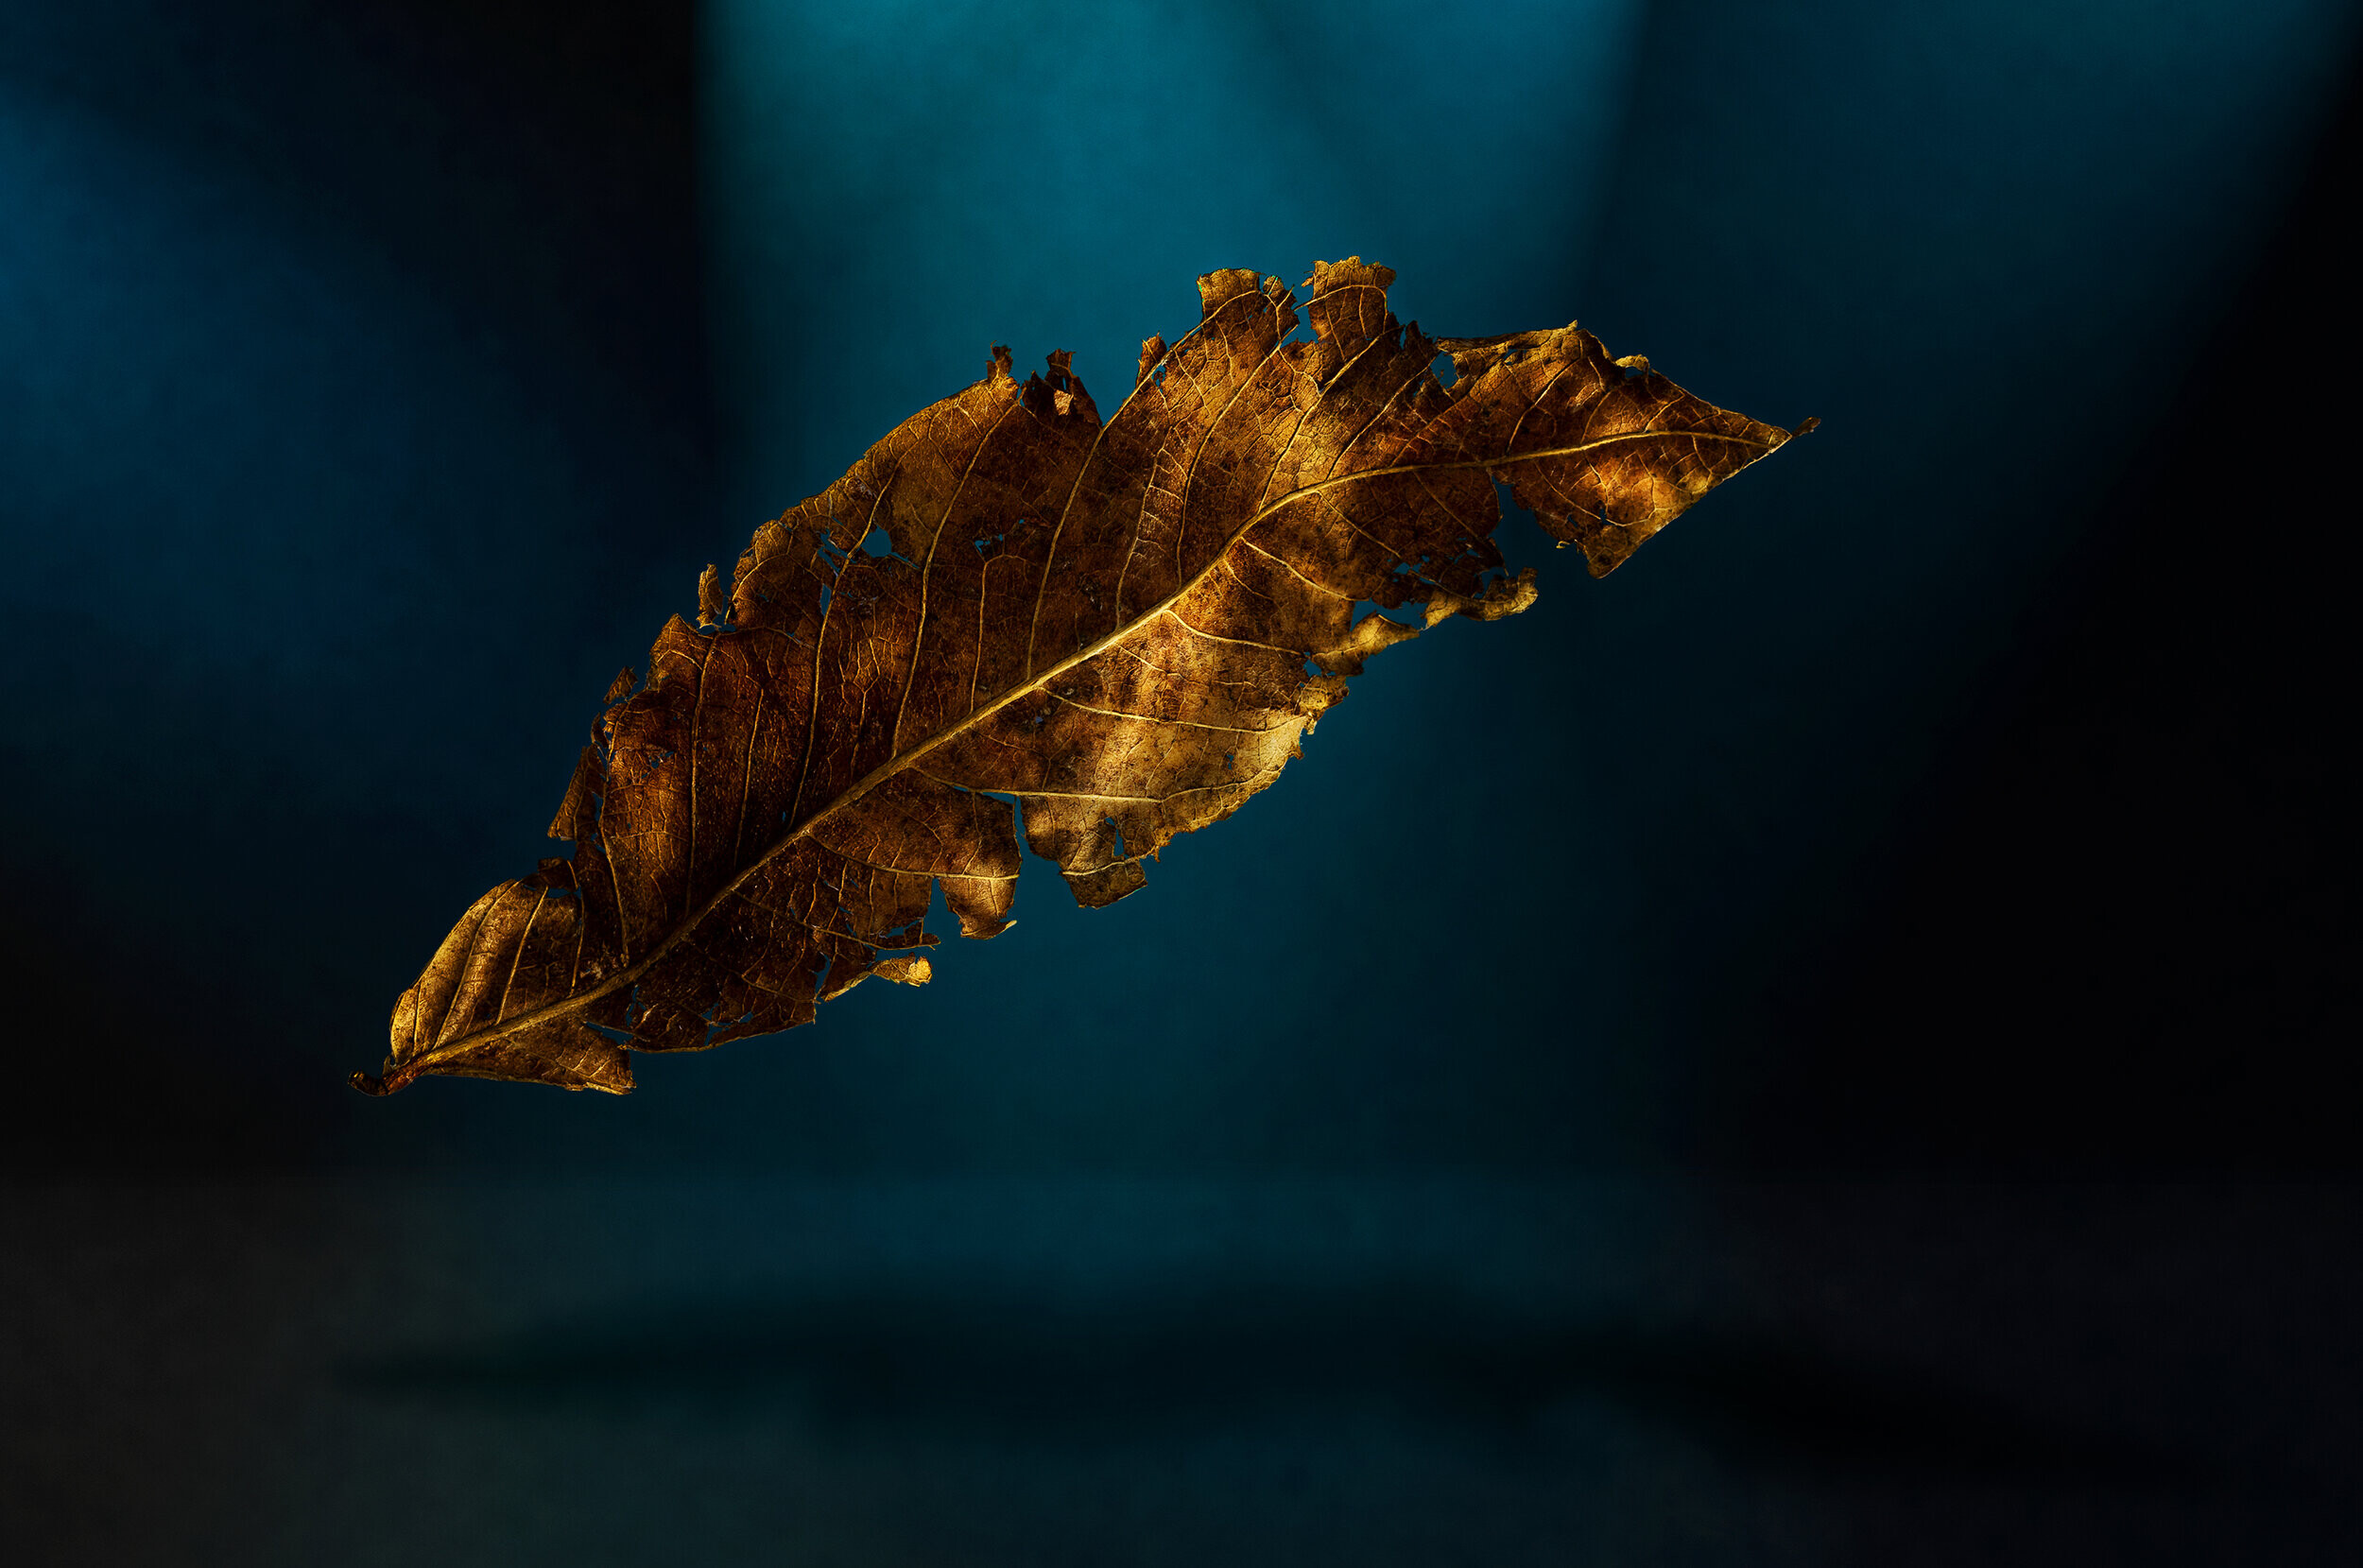 Gold Leaf: Dying and rotting leaves, Brown rusty foliage, Chlorophyll breakdown, Catabolic process of leaf senescence. 2500x1660 HD Wallpaper.